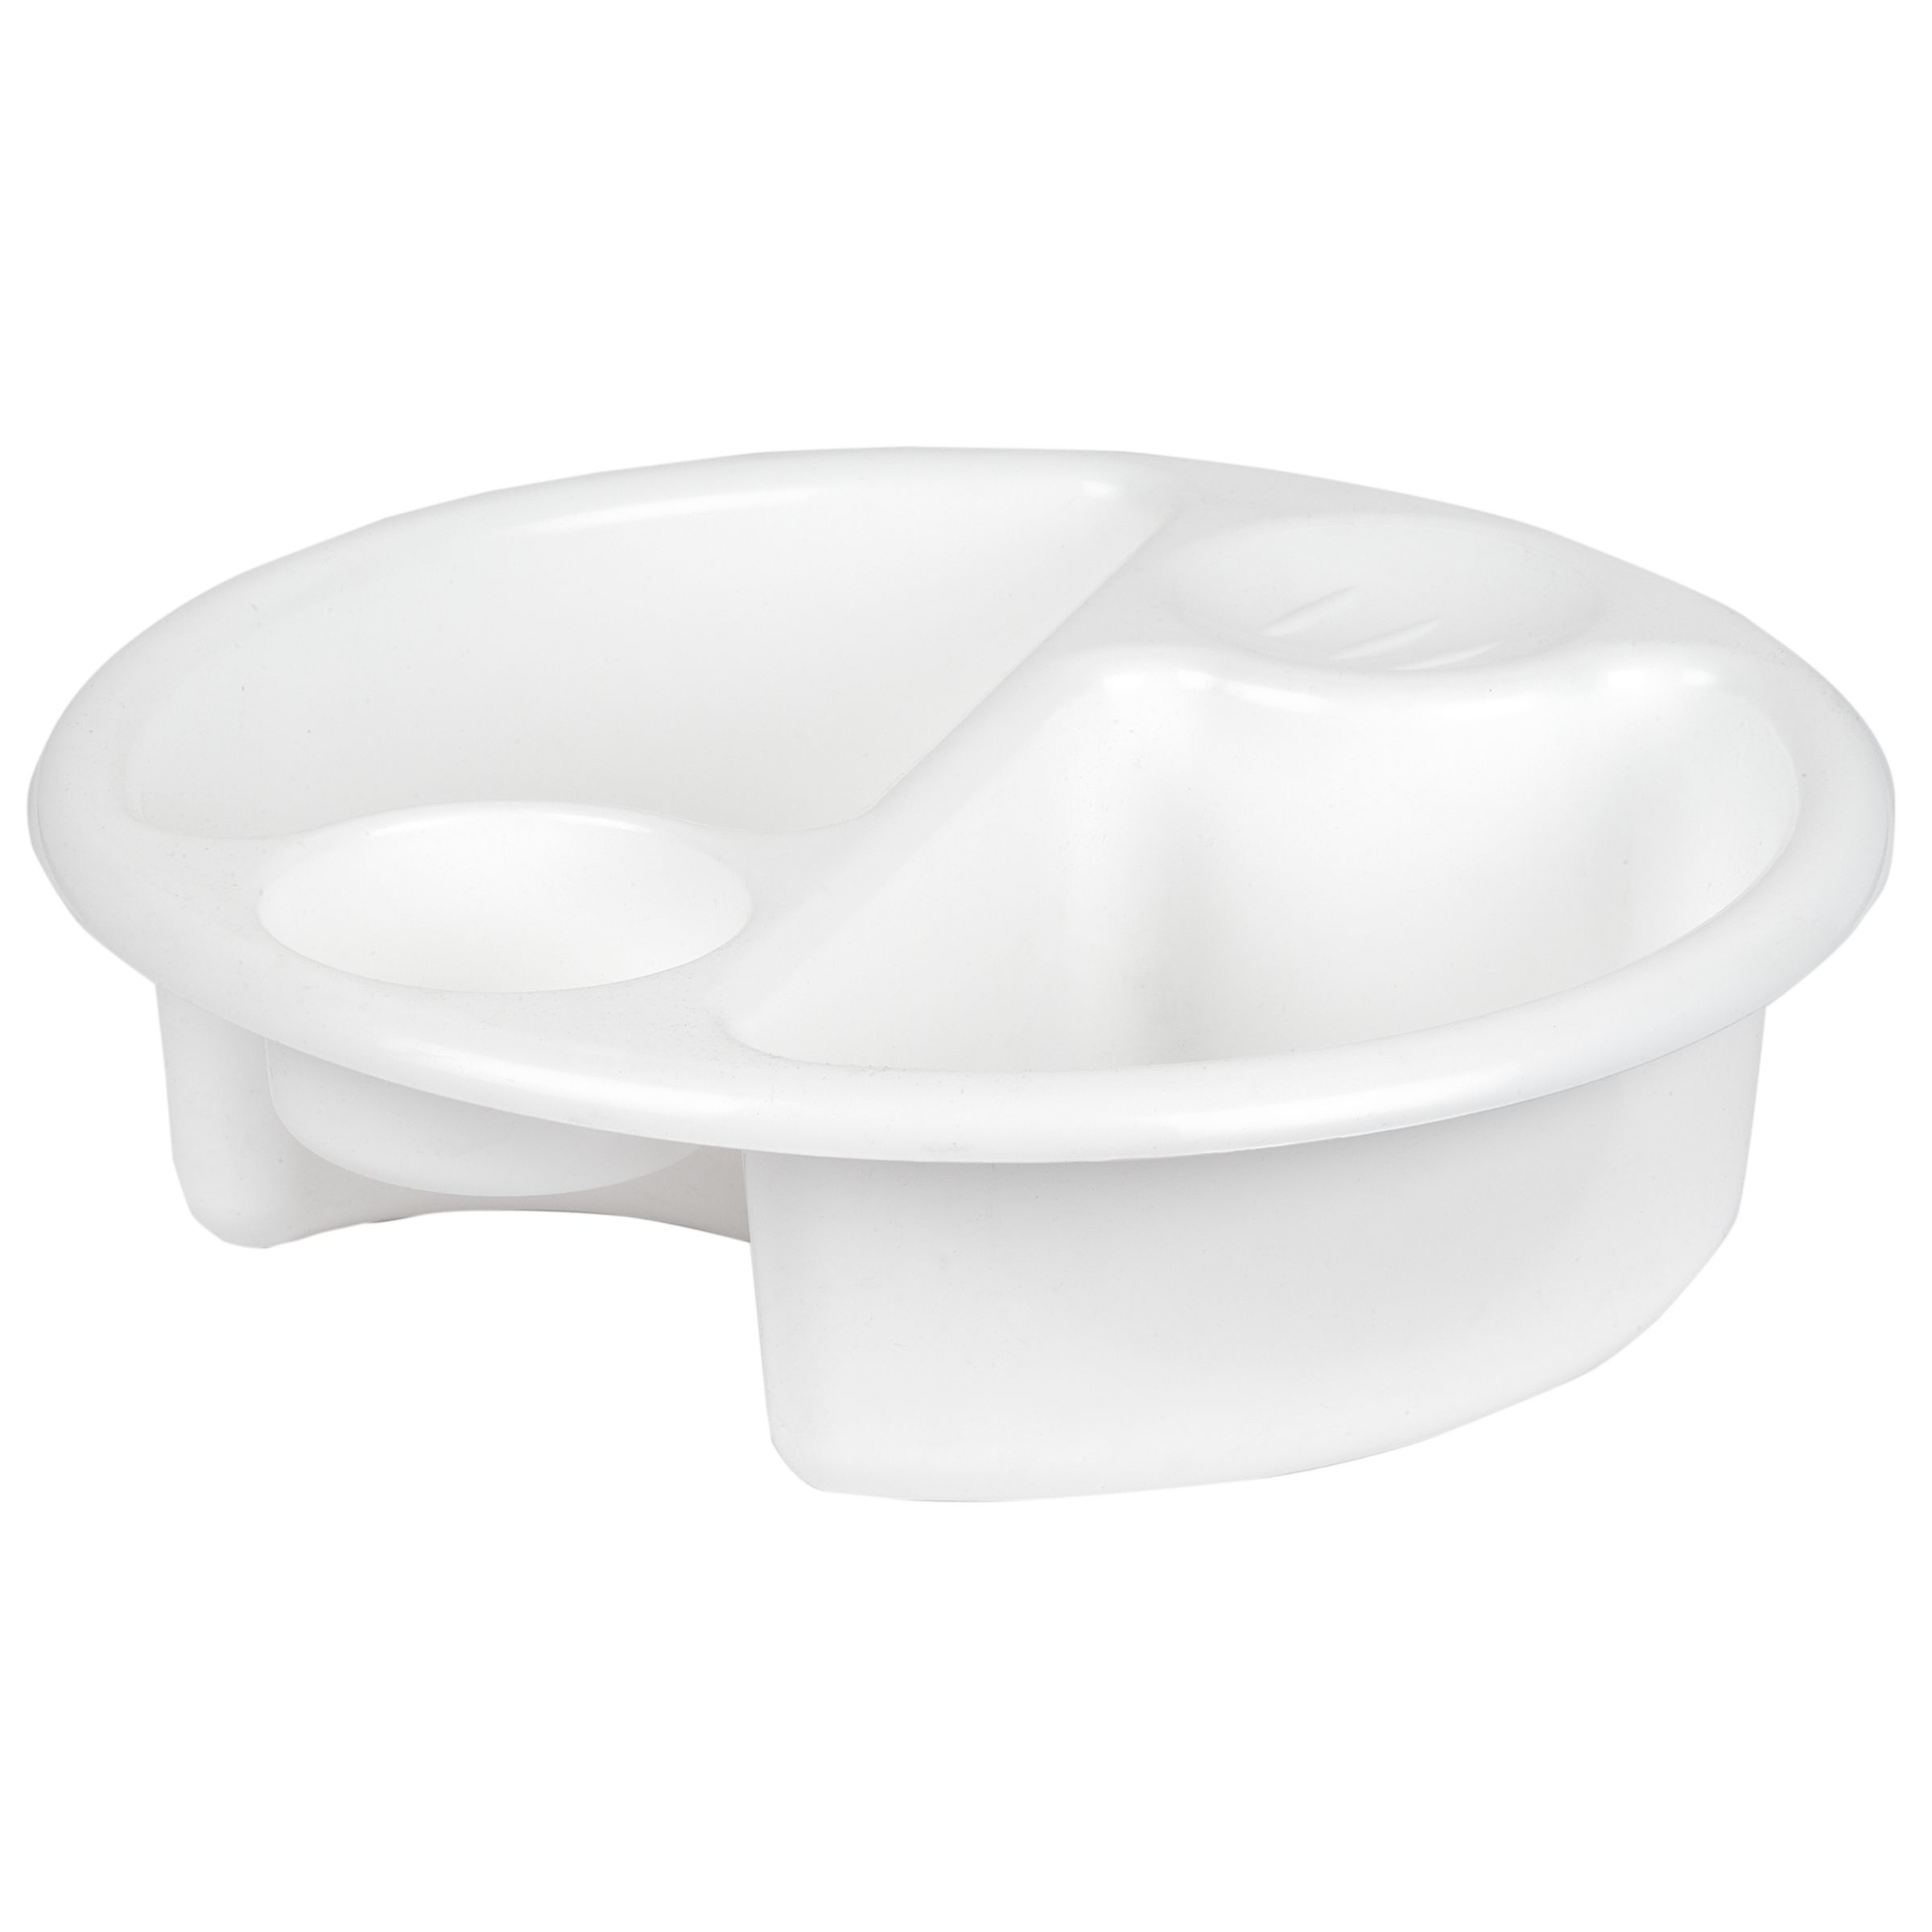 The Basics Top and Tail Bowl, White